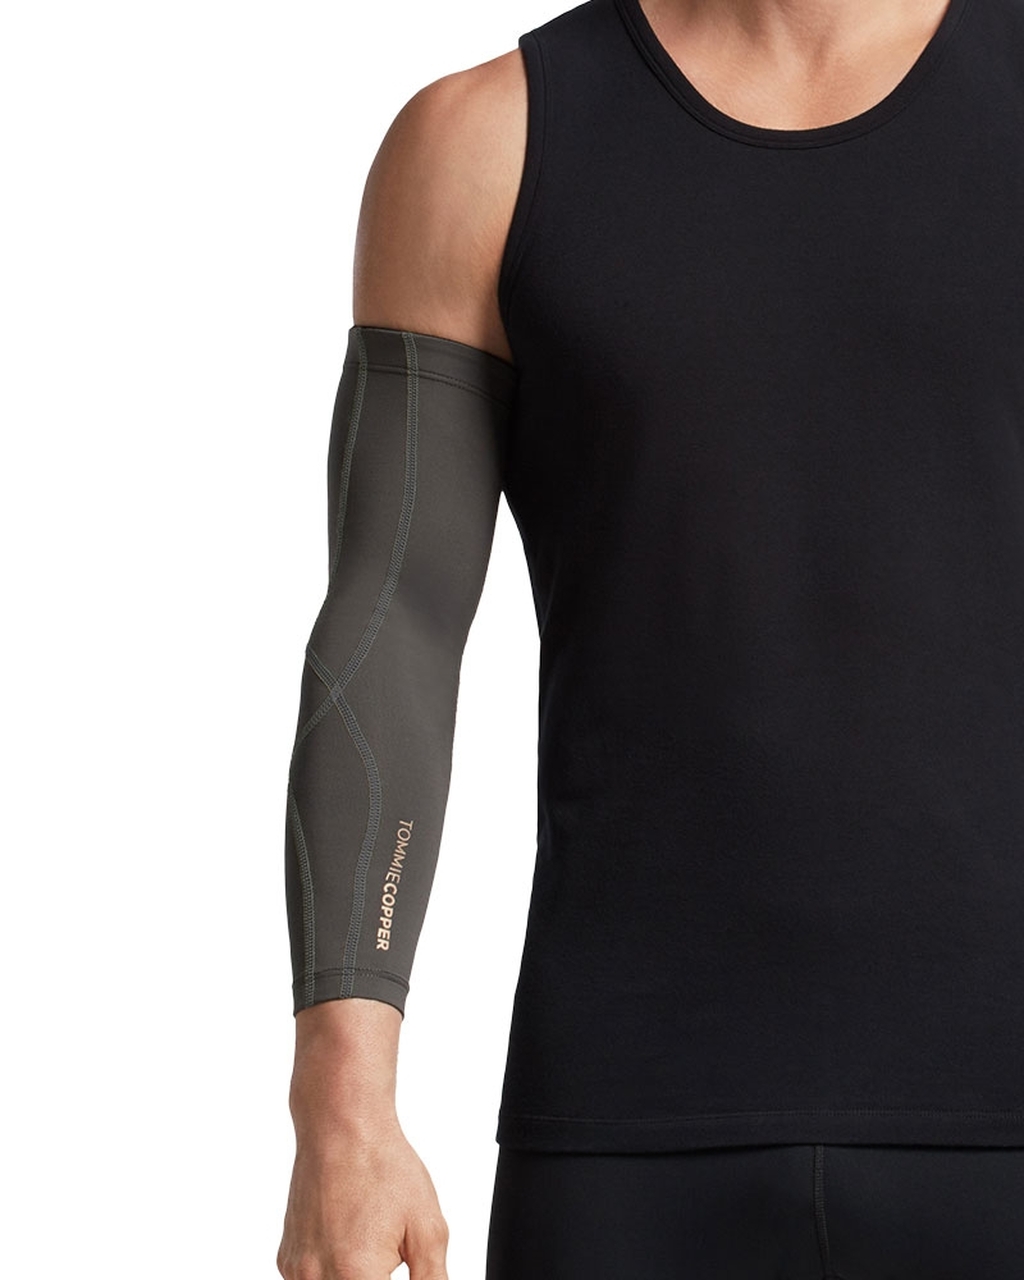 Men's Performance Compression Full Arm Sleeve